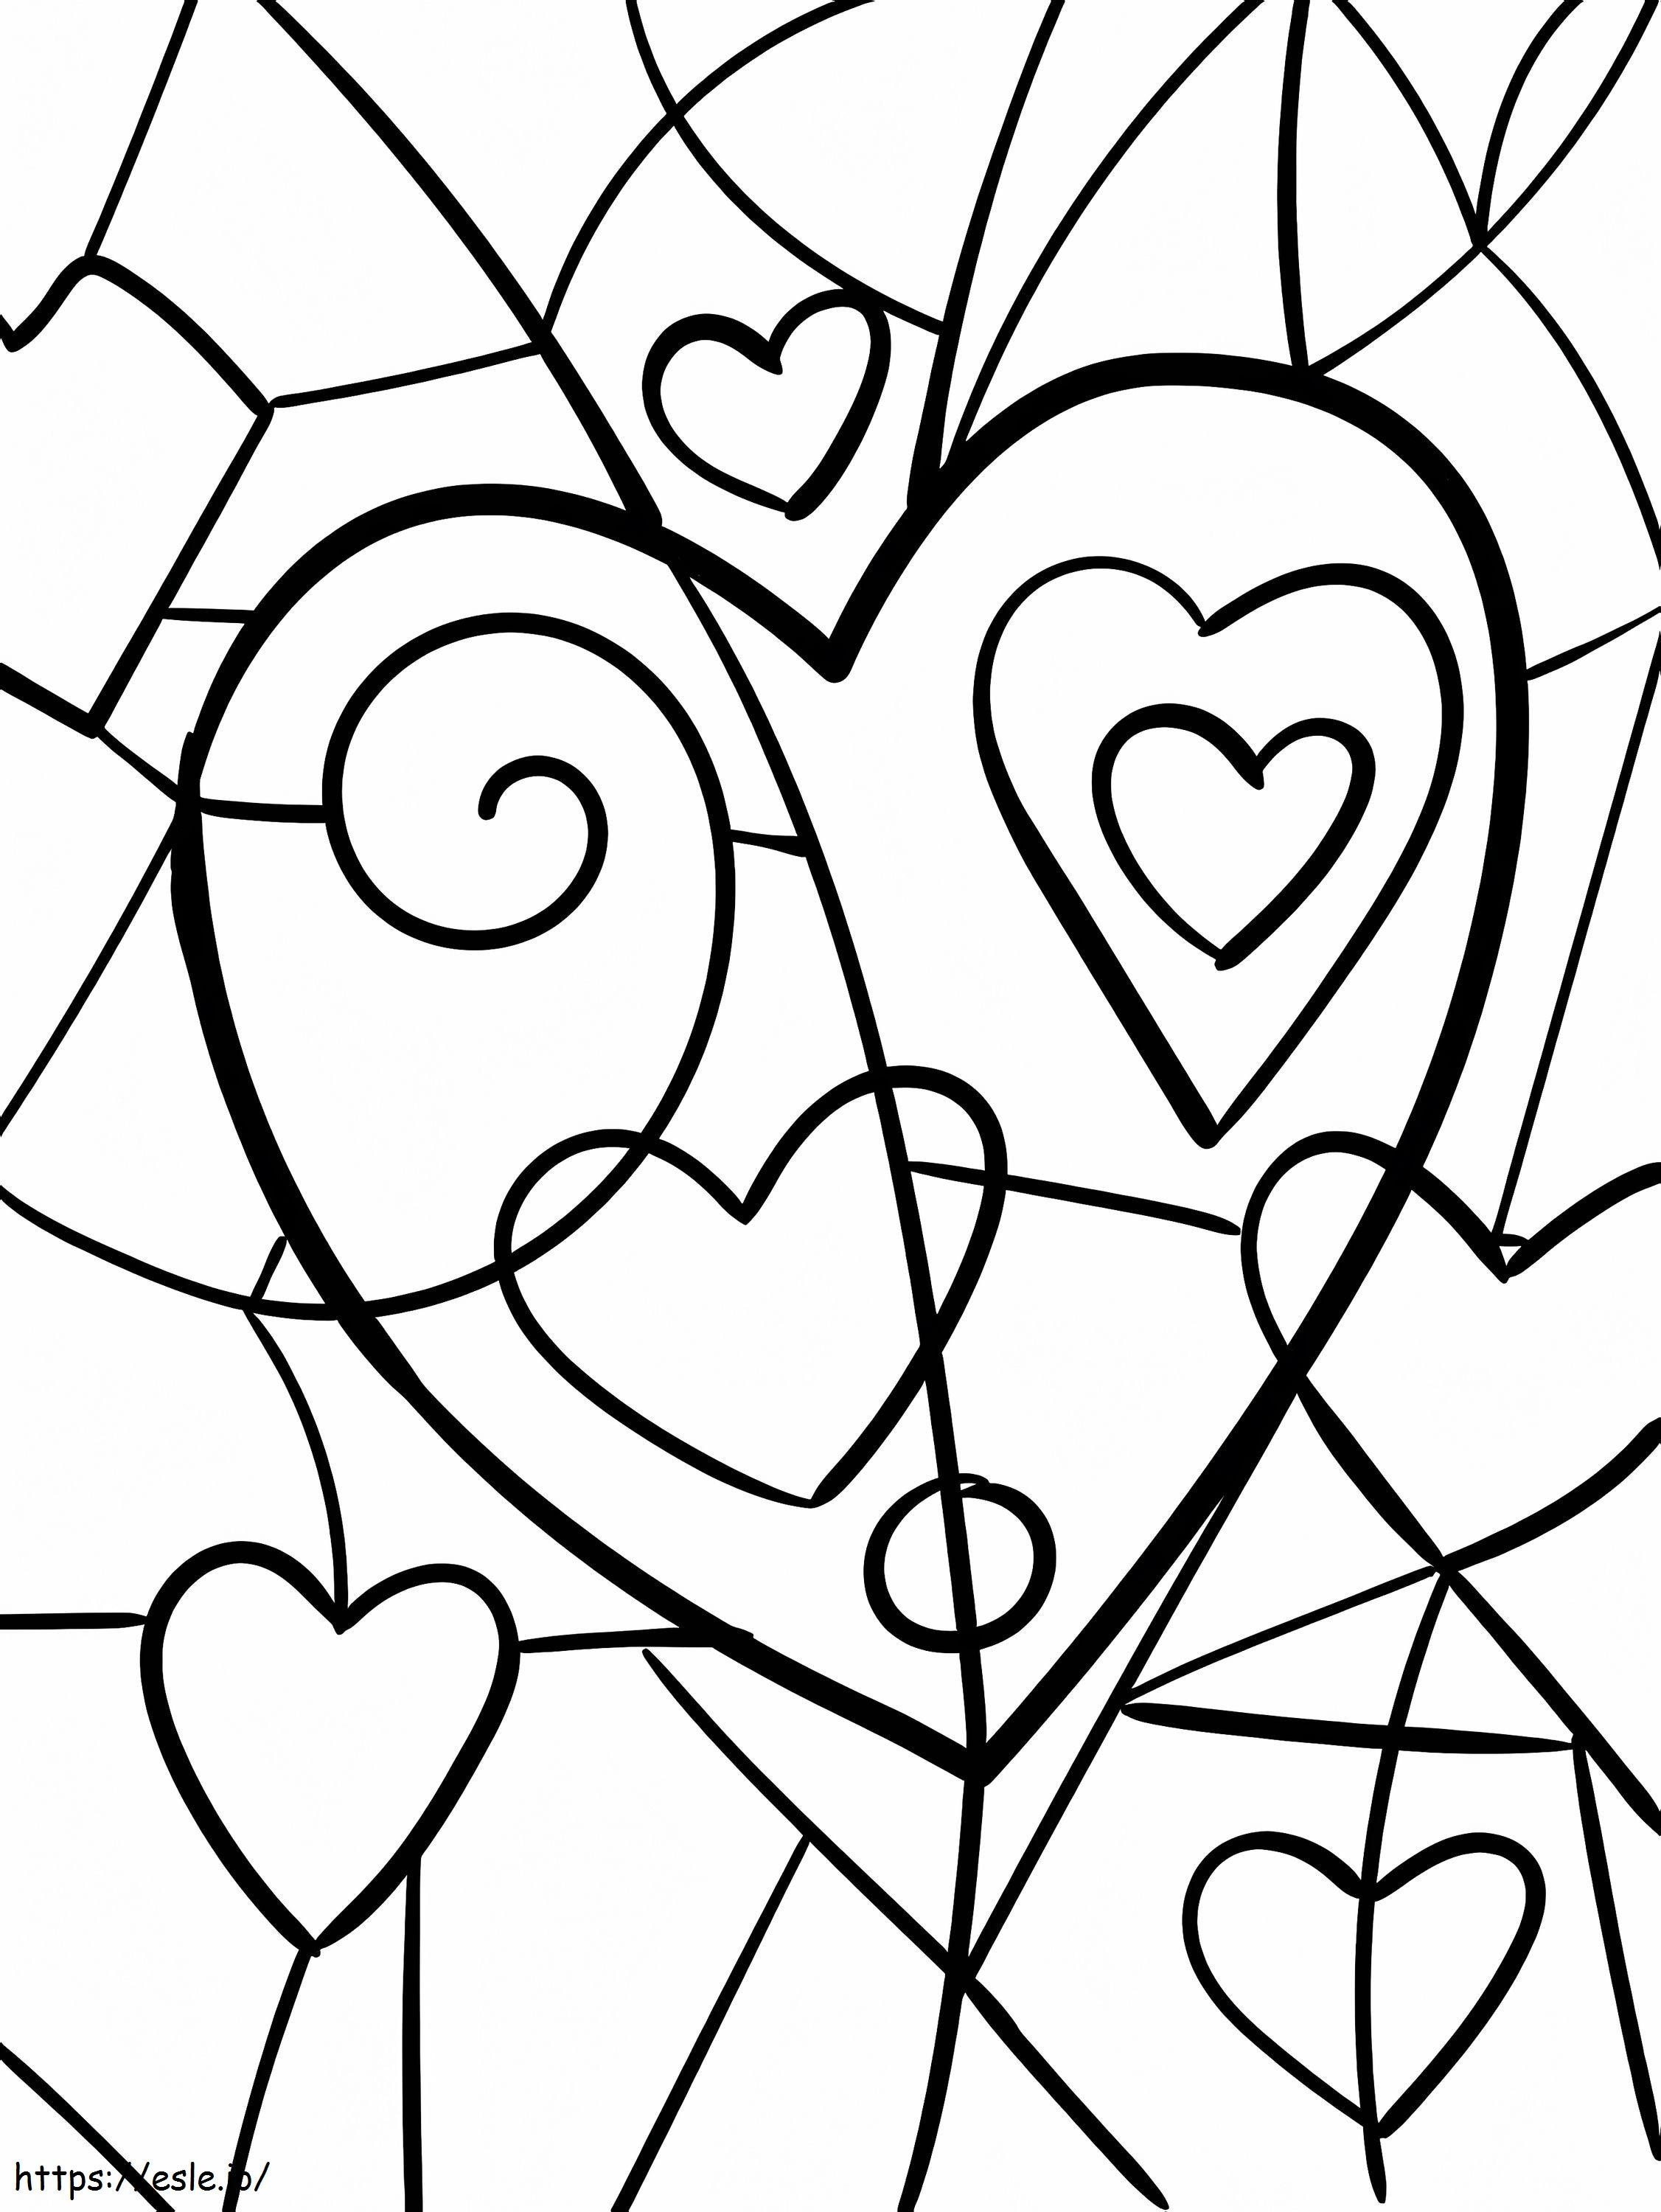 Heart Pattern coloring page